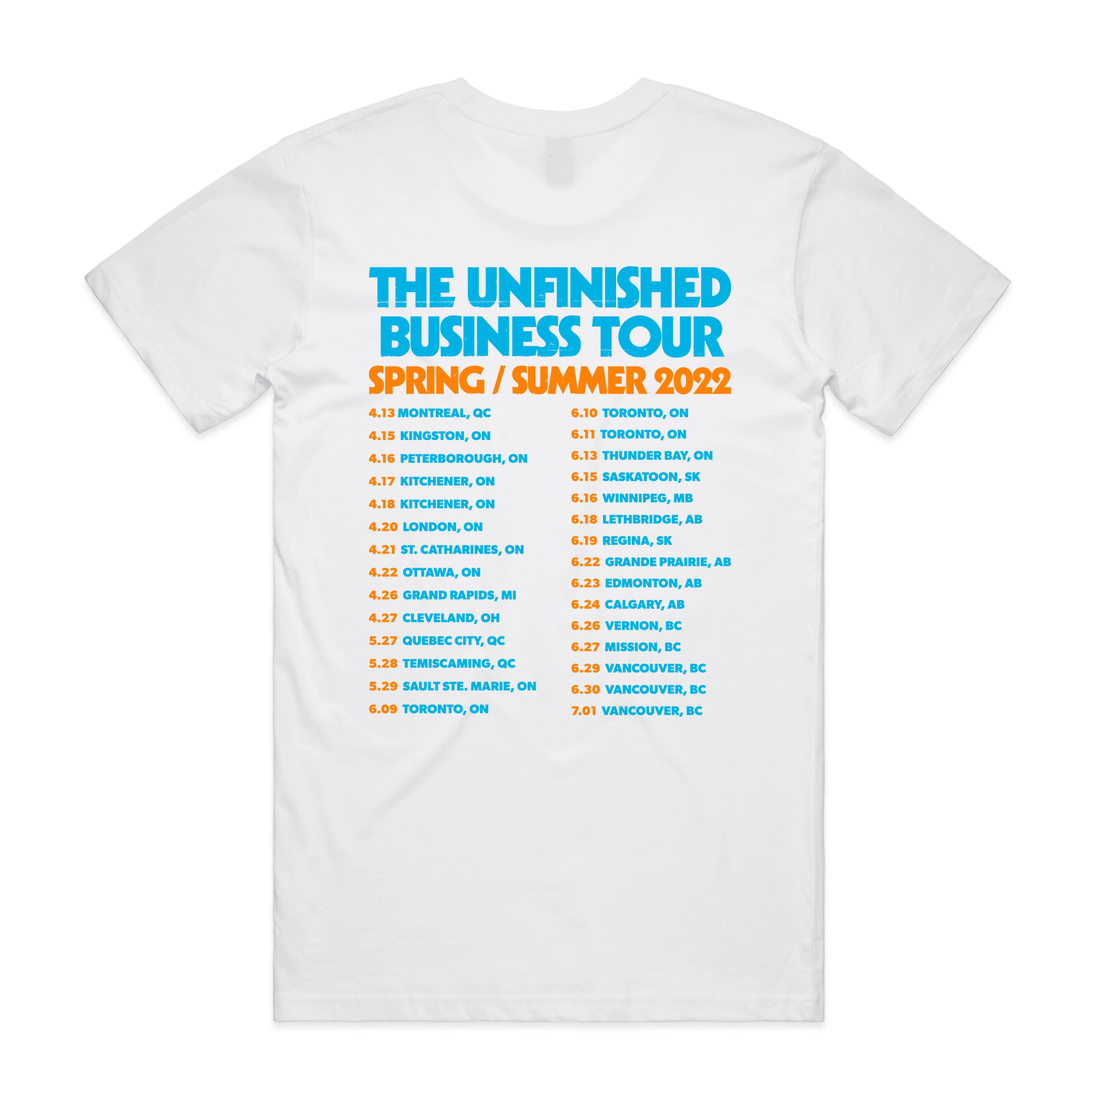 The Glorious Sons - The Unfinished Business - Tour Tee - White